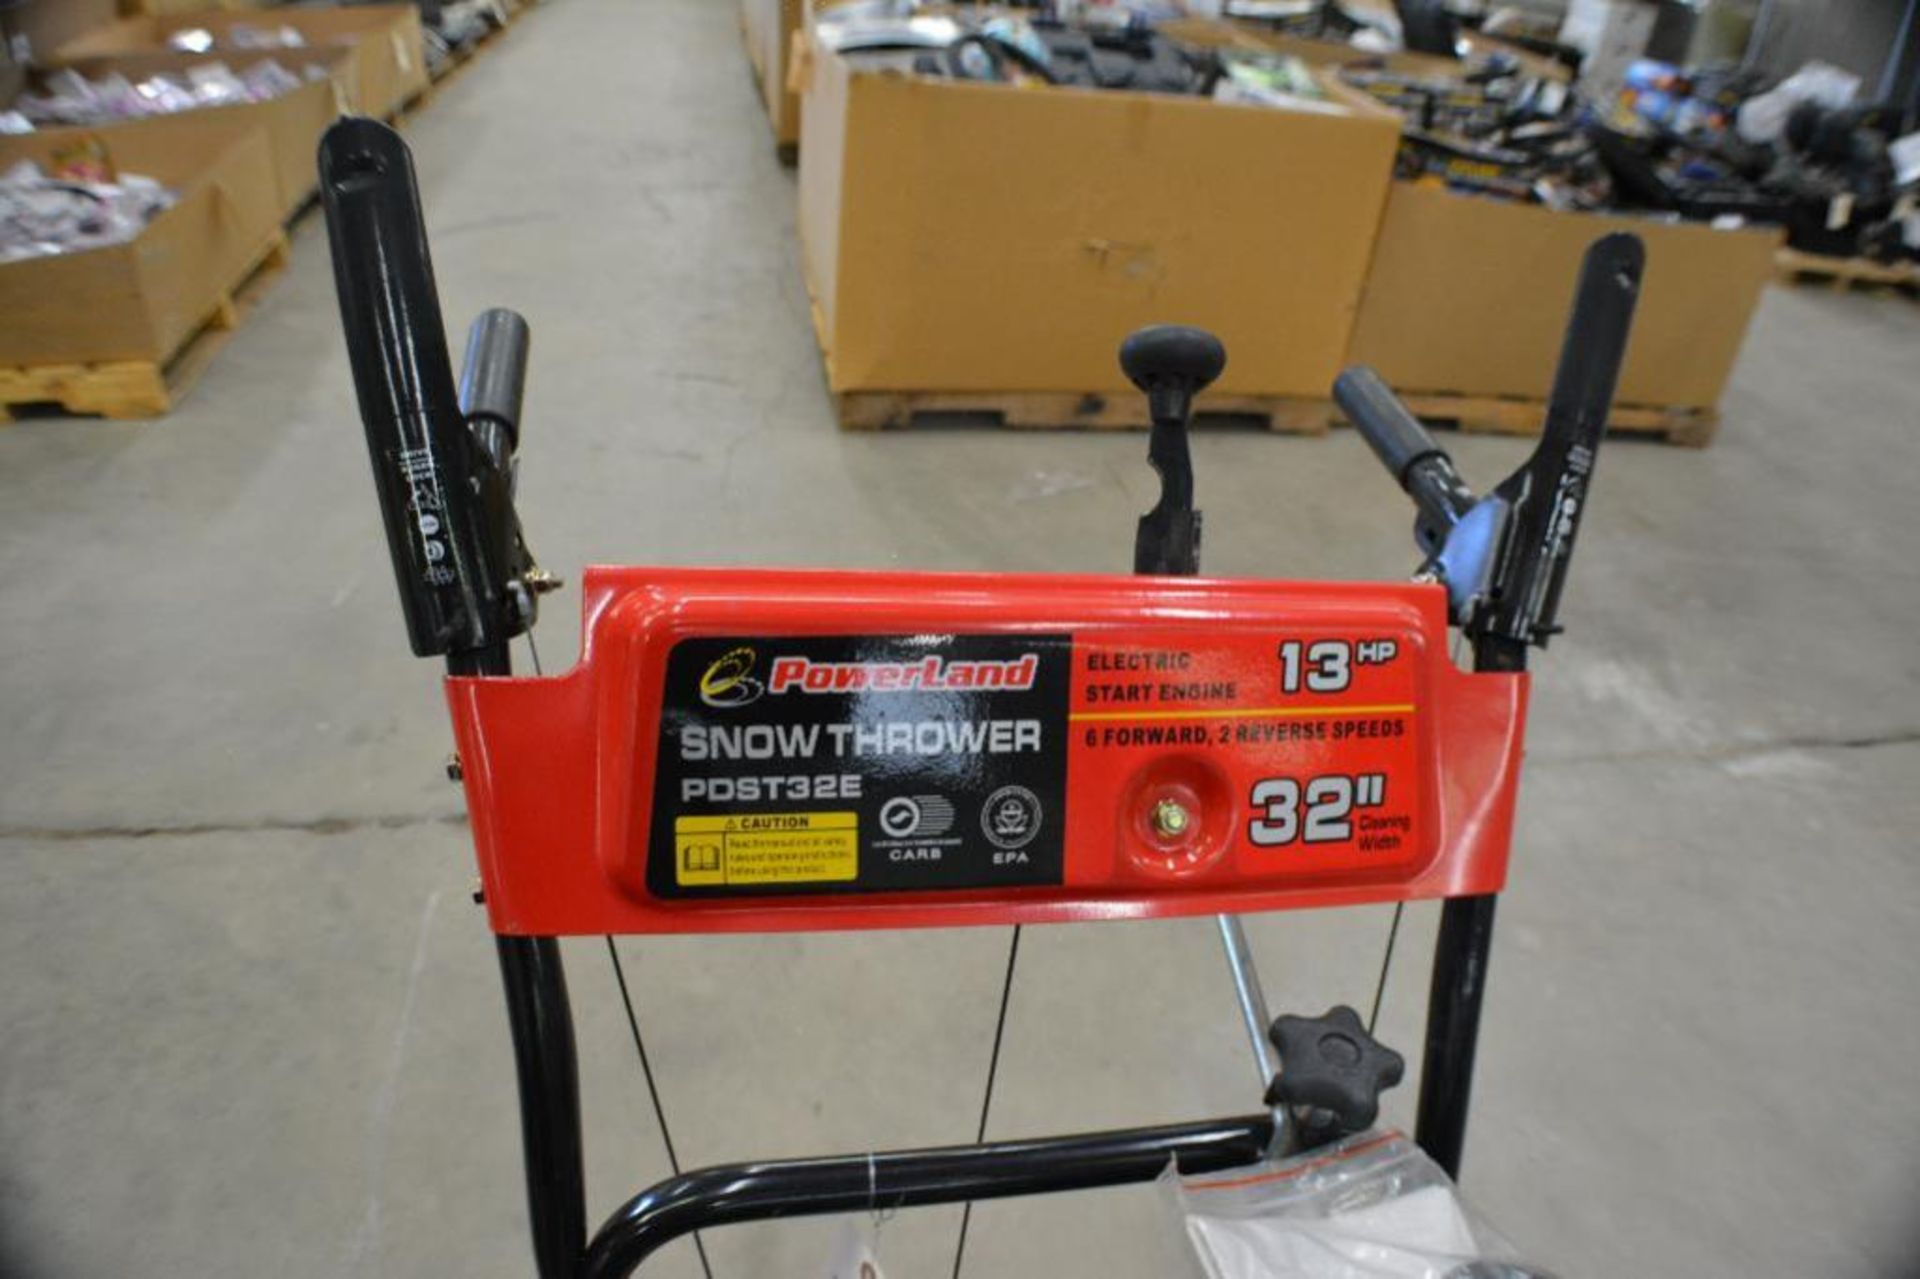 Snow Thrower 32in. 13HP with electric Start Engine 4 Stroke by Powerland - Image 5 of 8